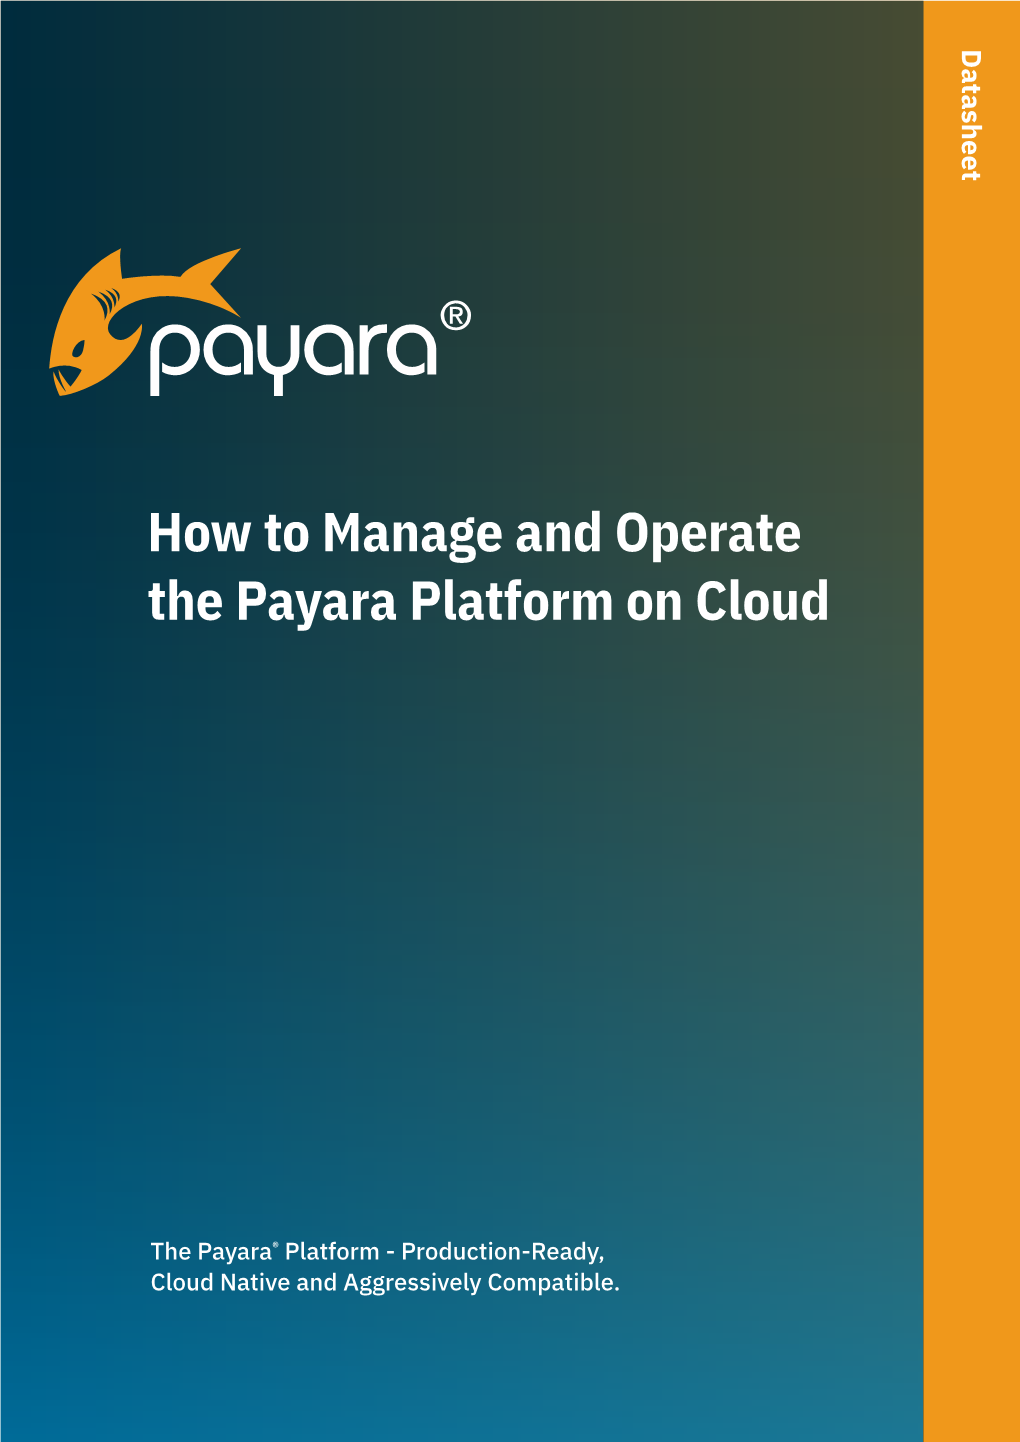 How to Manage and Operate the Payara Platform on Cloud